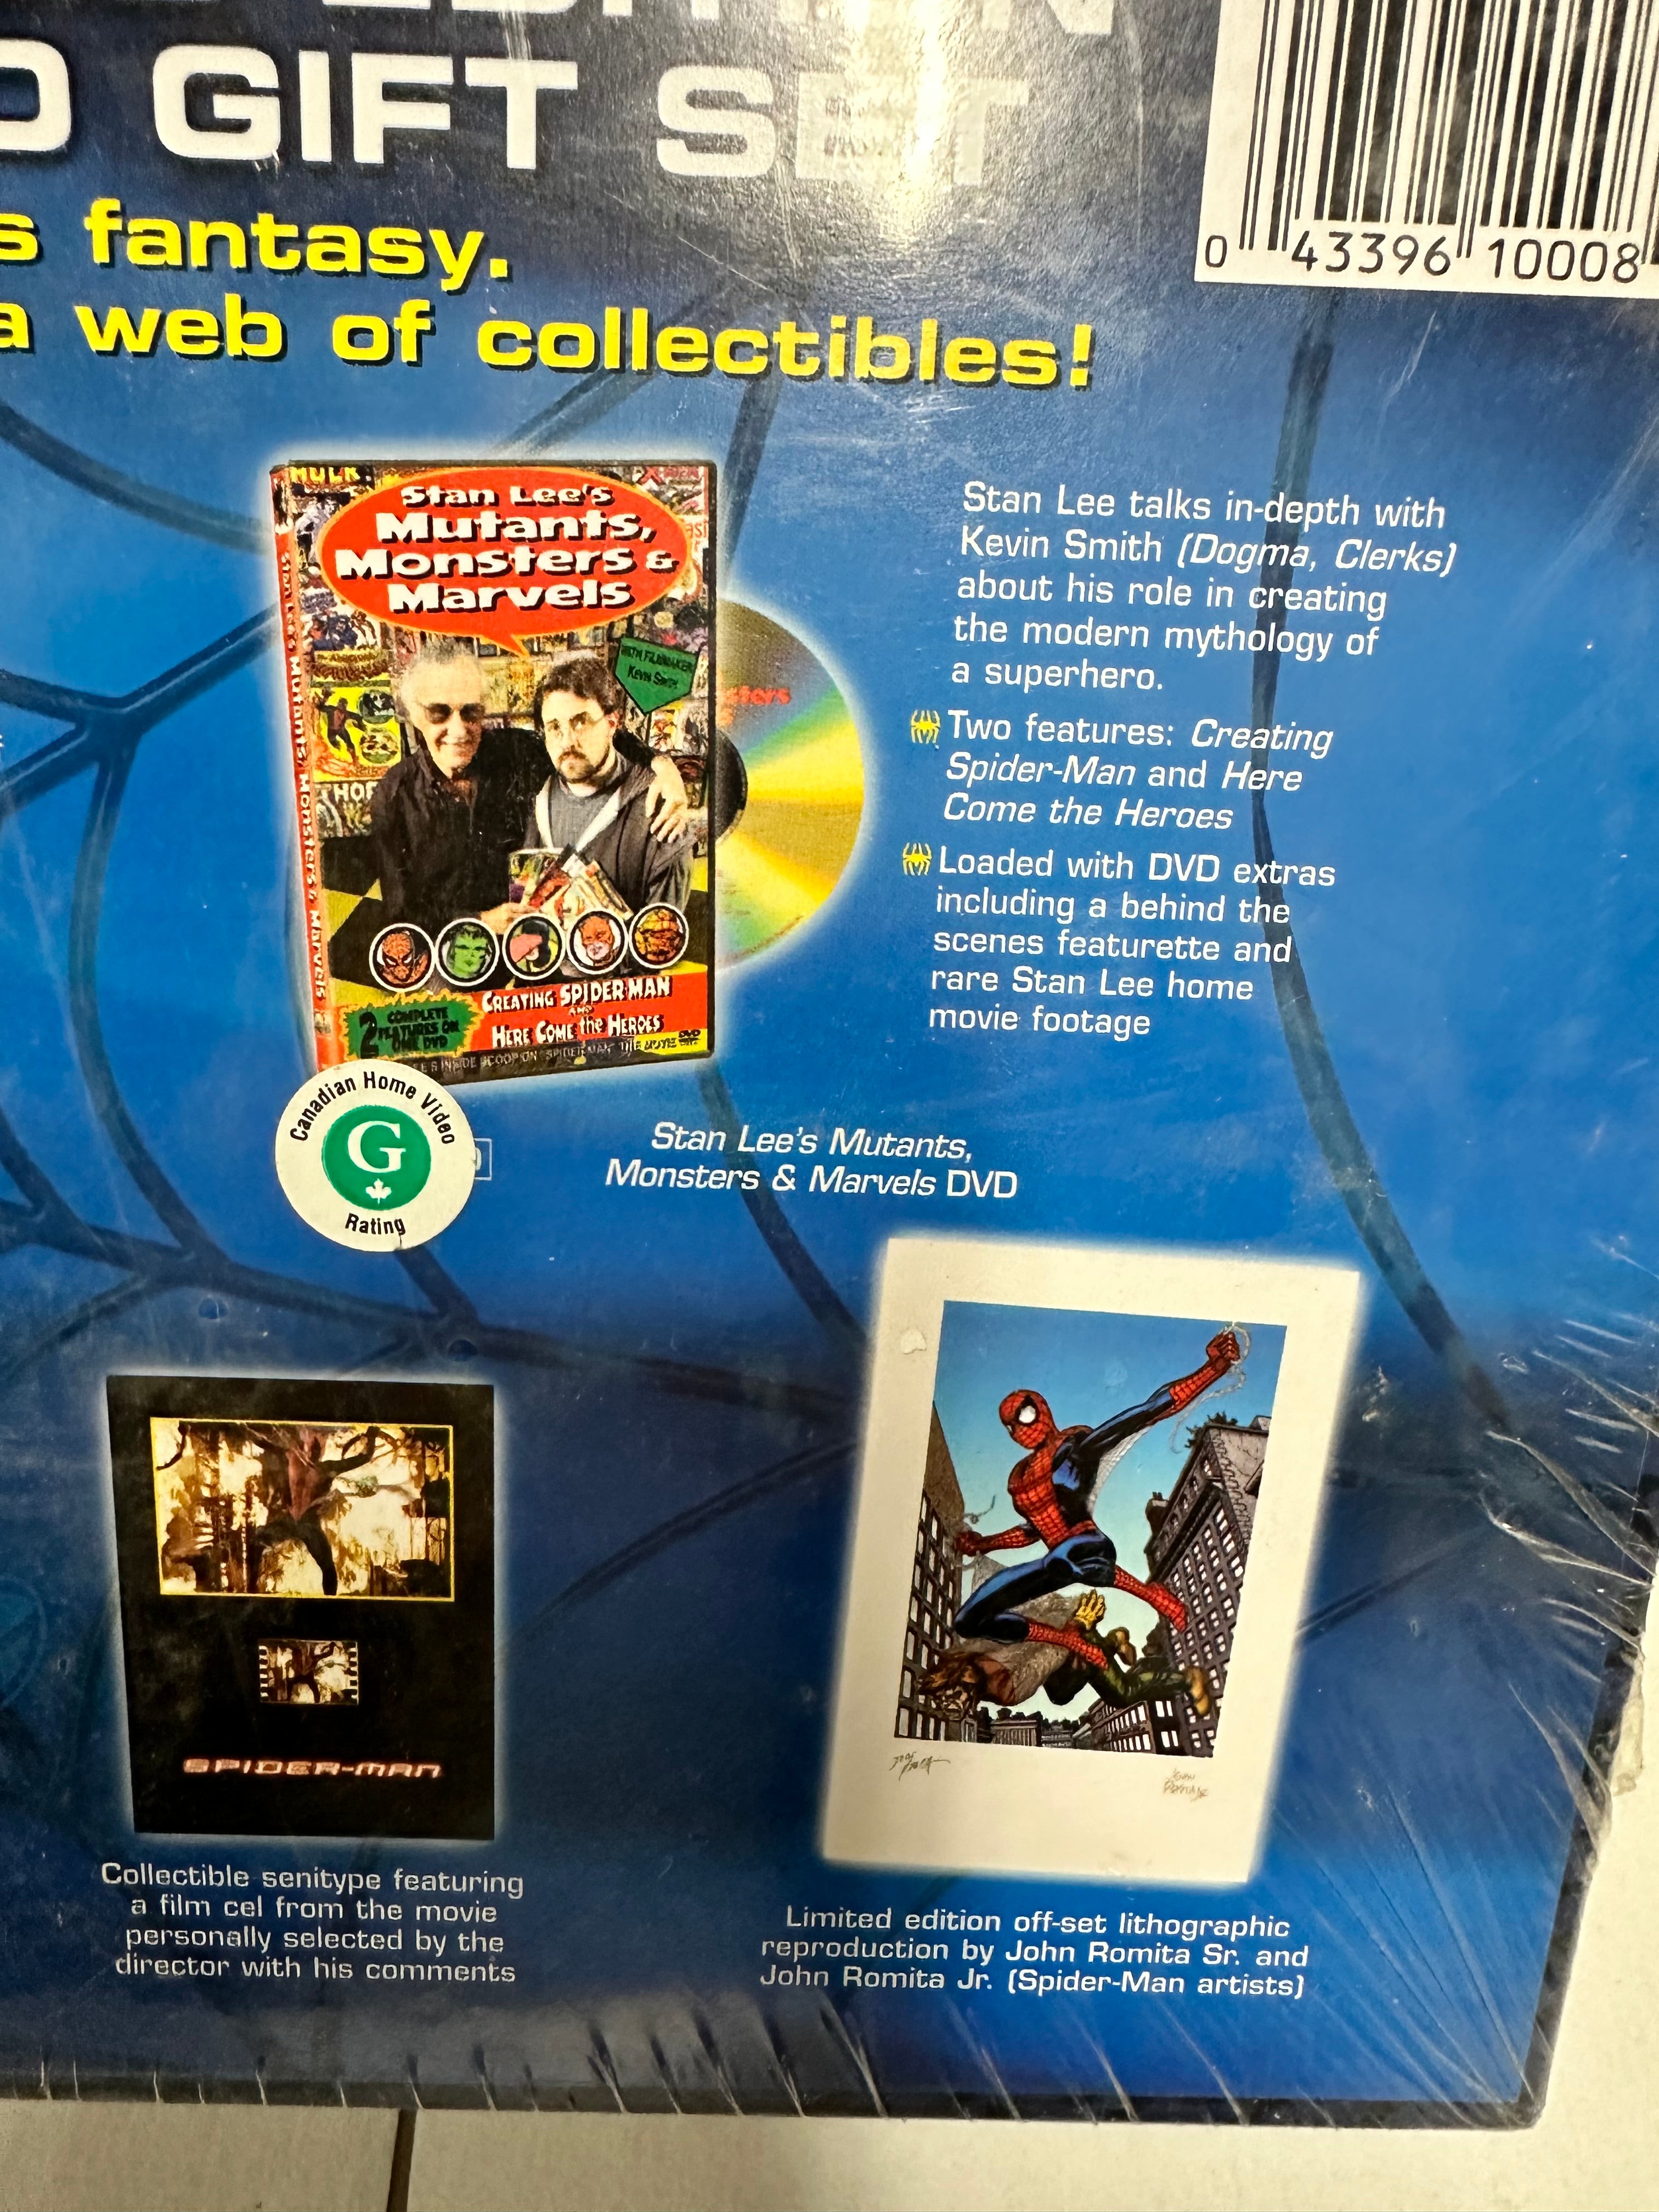 Spider-Man, limited edition gift set with DVD lithograph and amazing fancy 15 reprint comic factory sealed